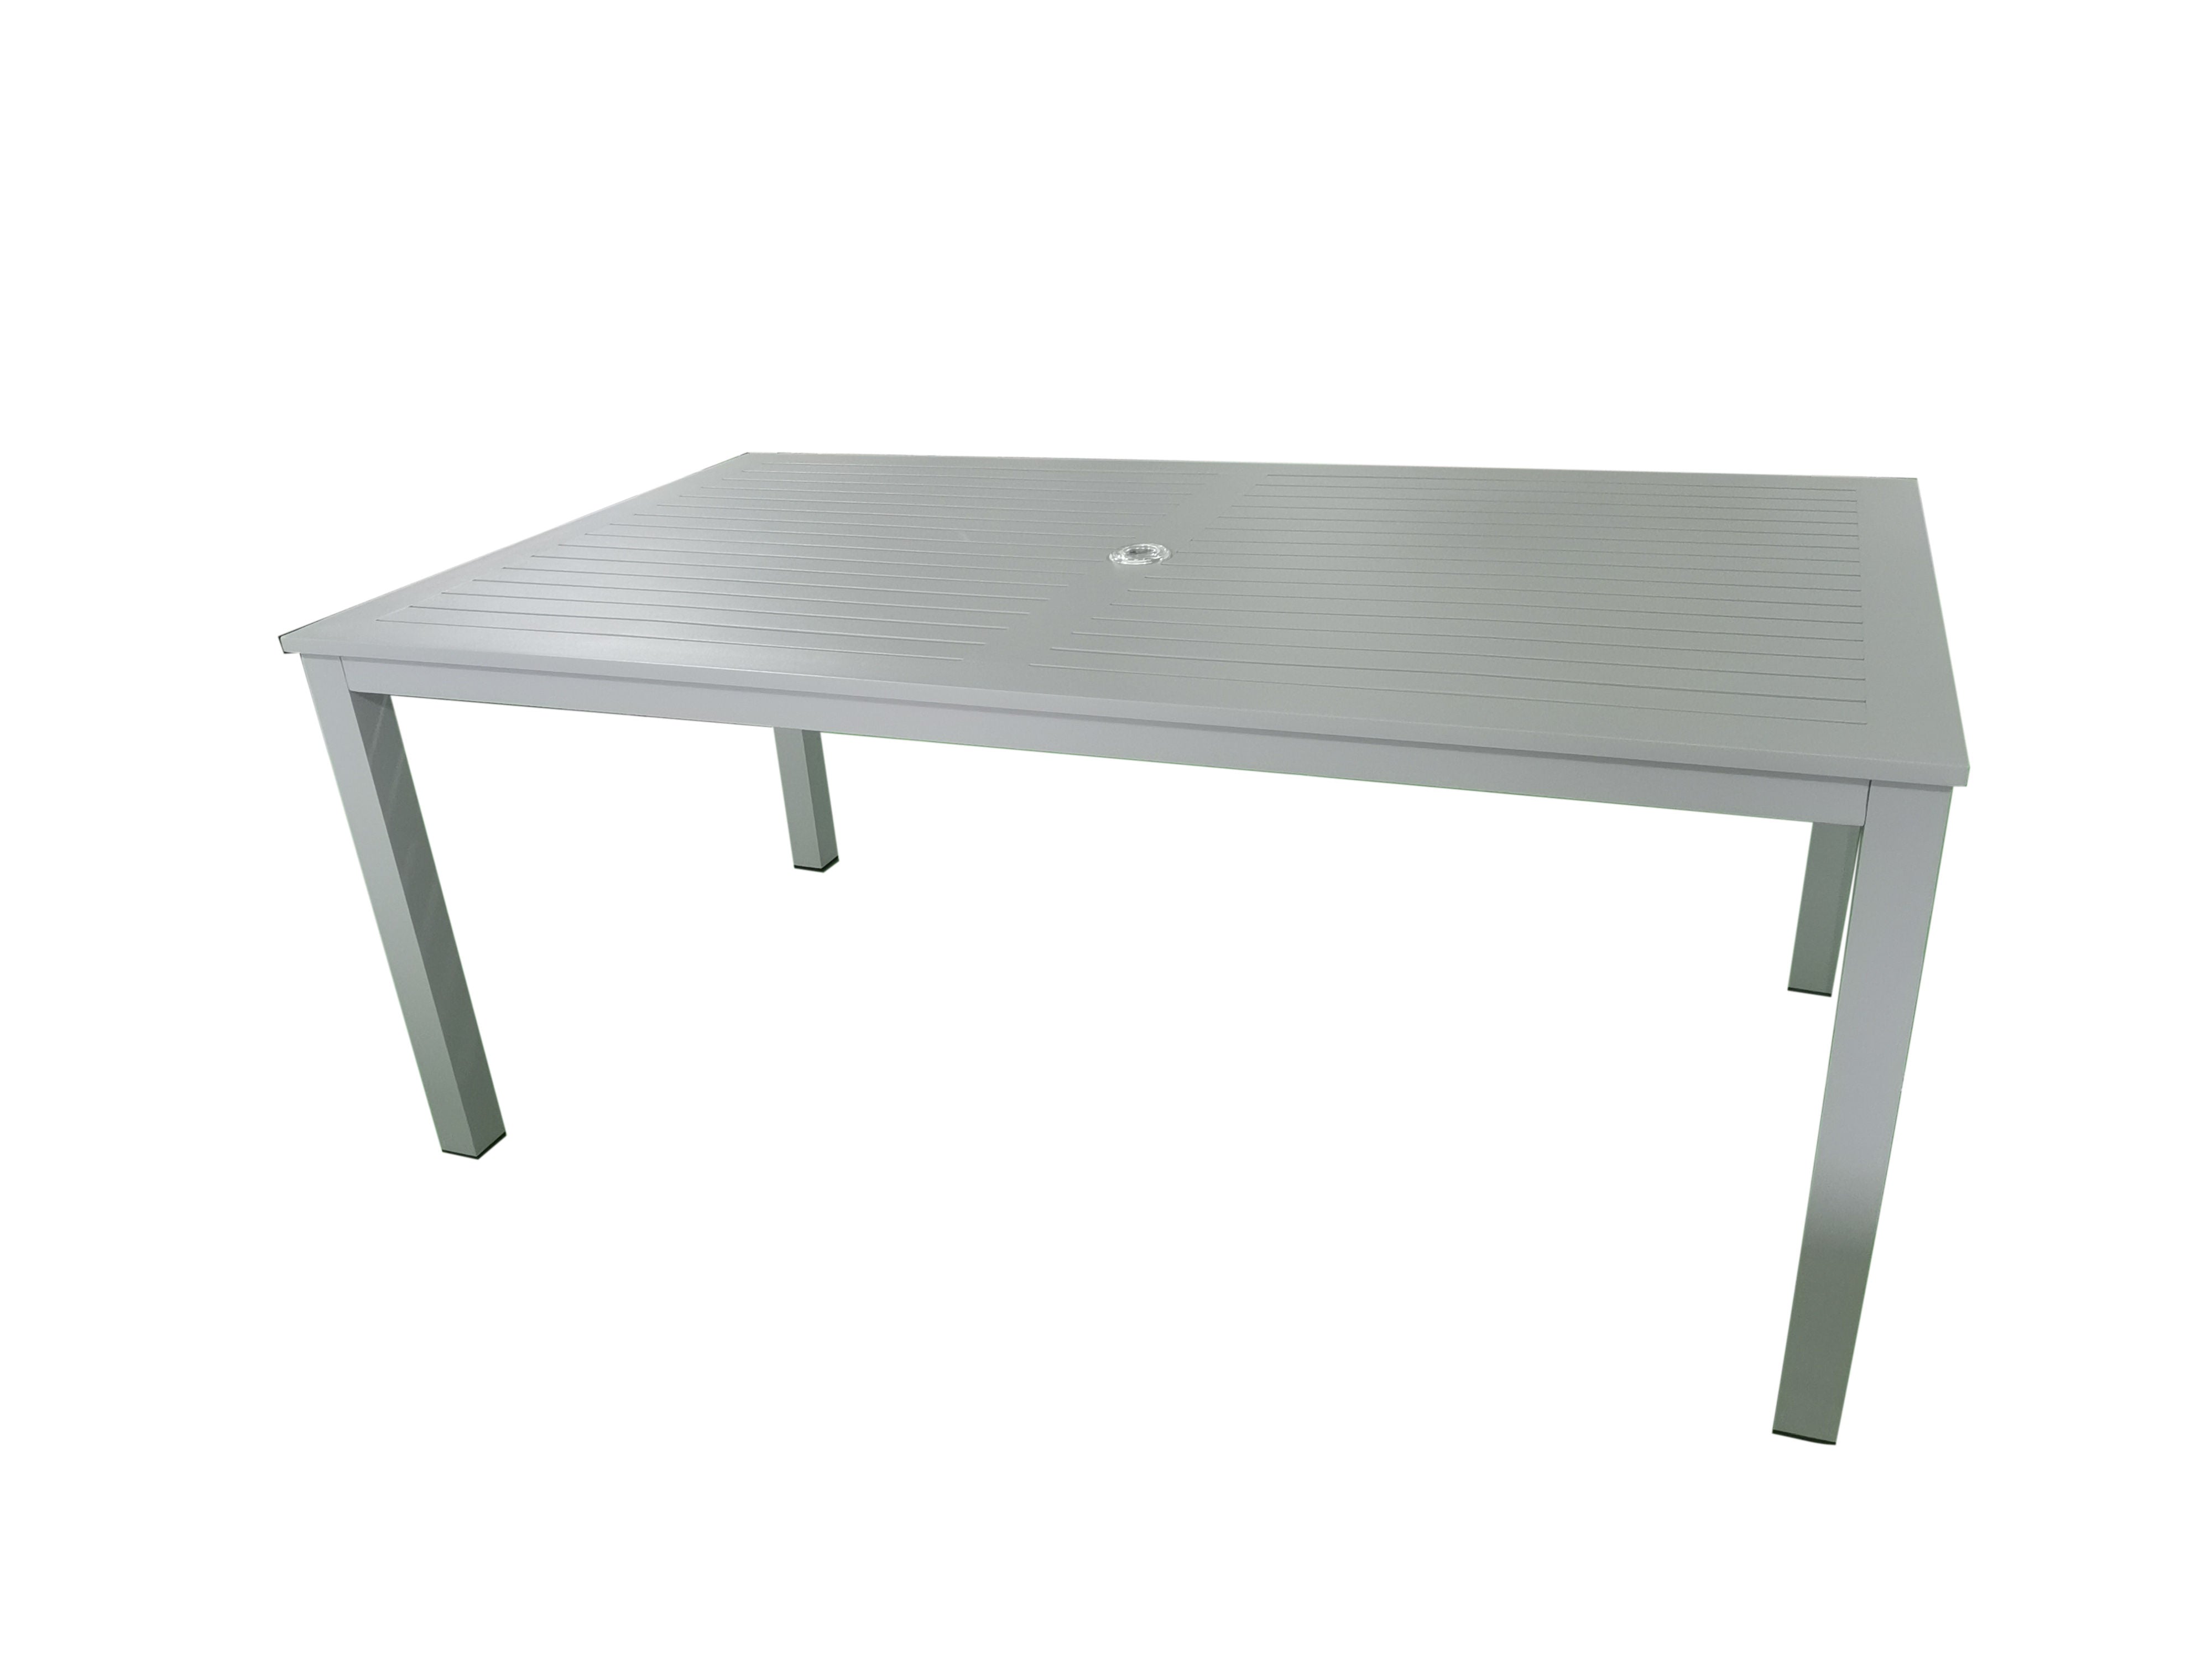 PatioZone Dining Table with Slated Tabletop w/Umbrella Hole in Middle and Aluminum Frame (MOSS-T297GP) - Matte Light Grey